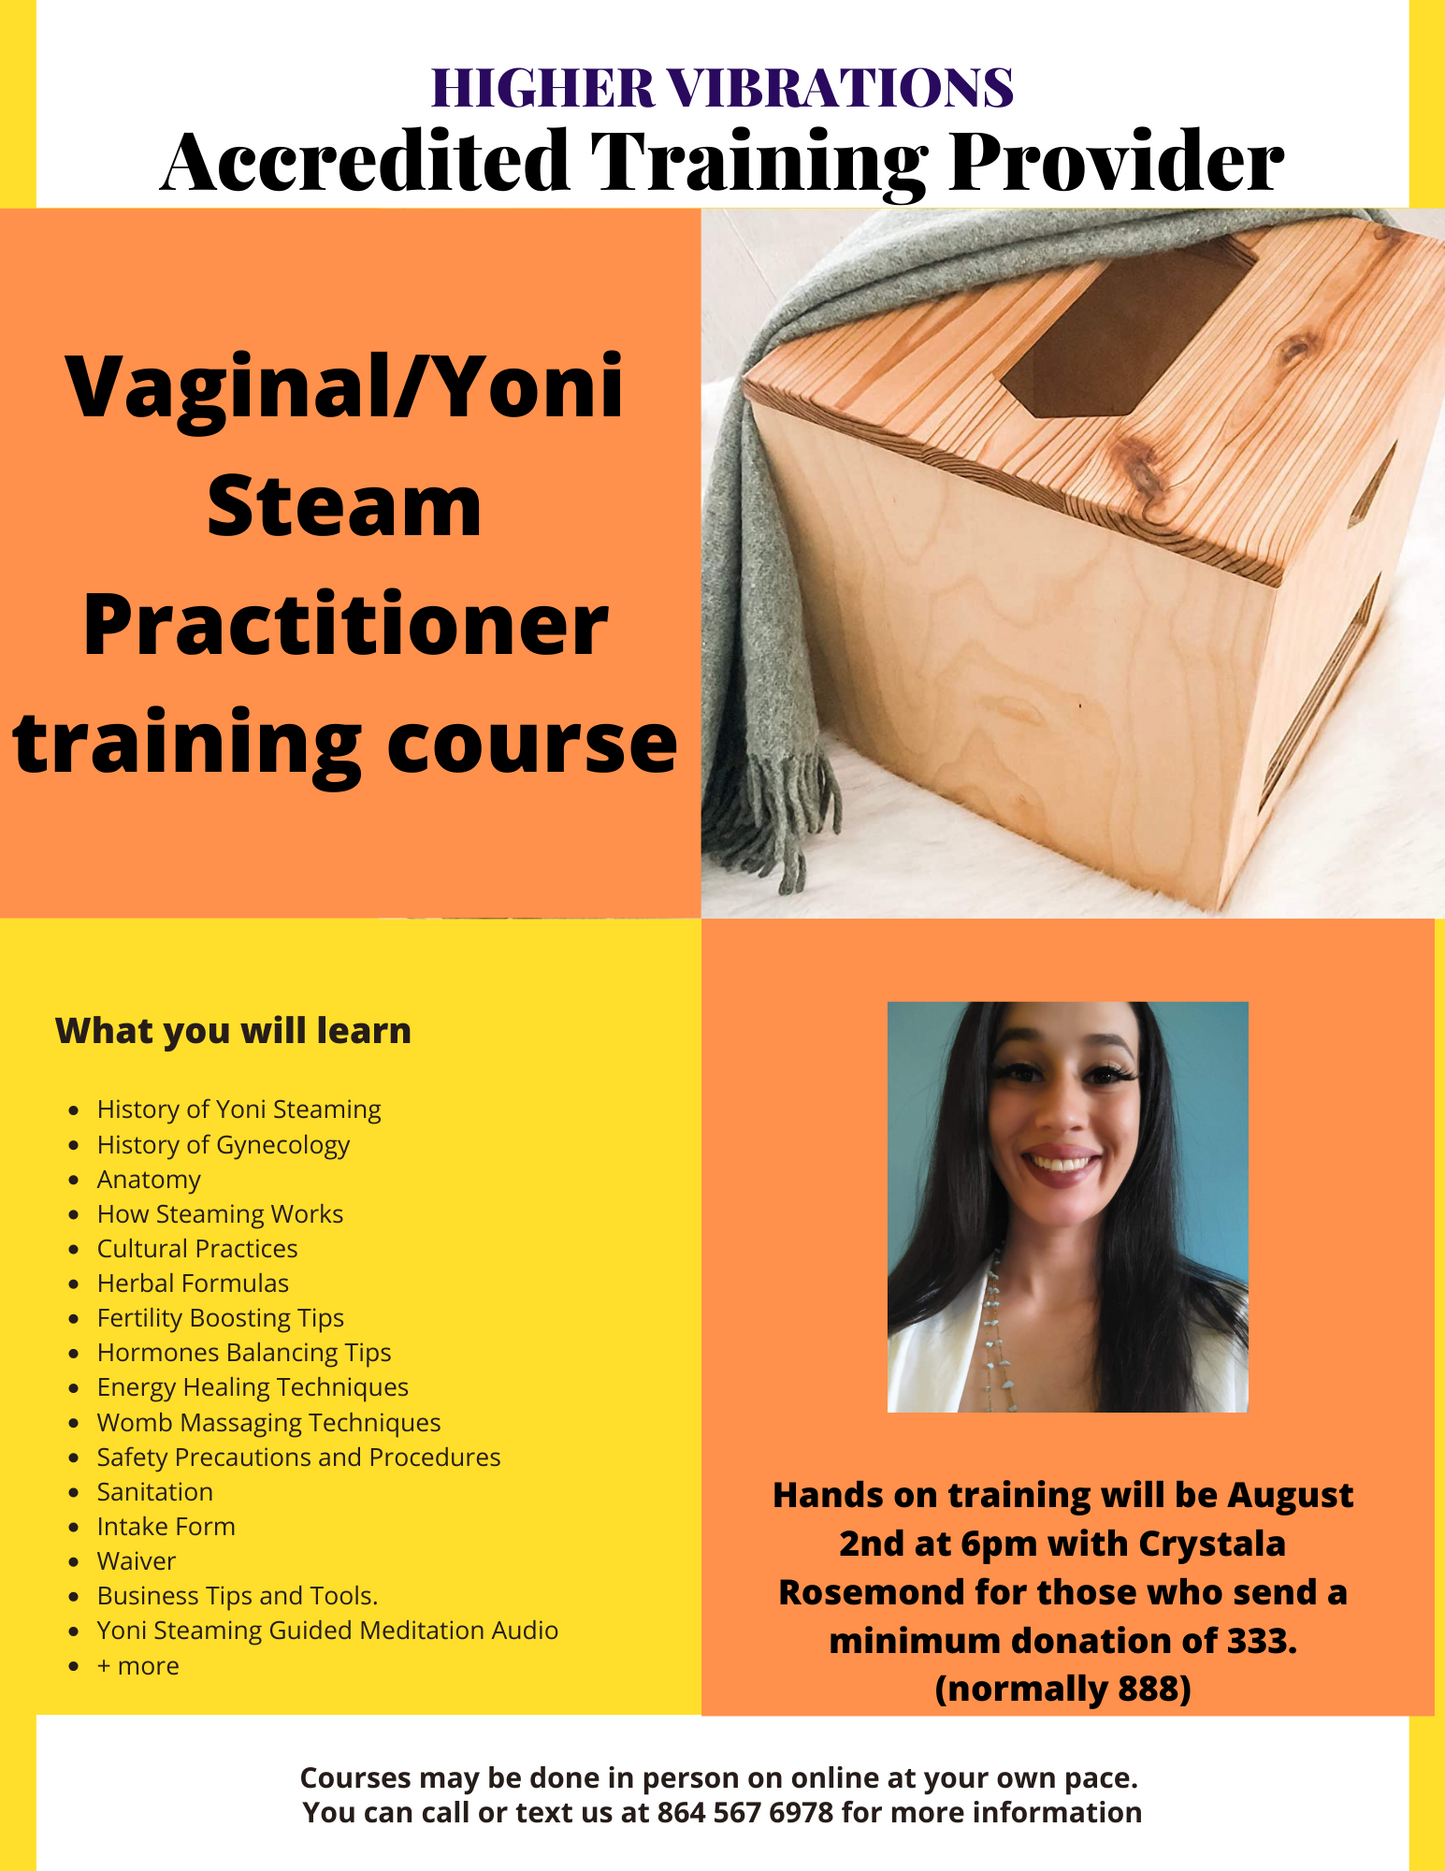 Deposit for Yoni Steam Course.